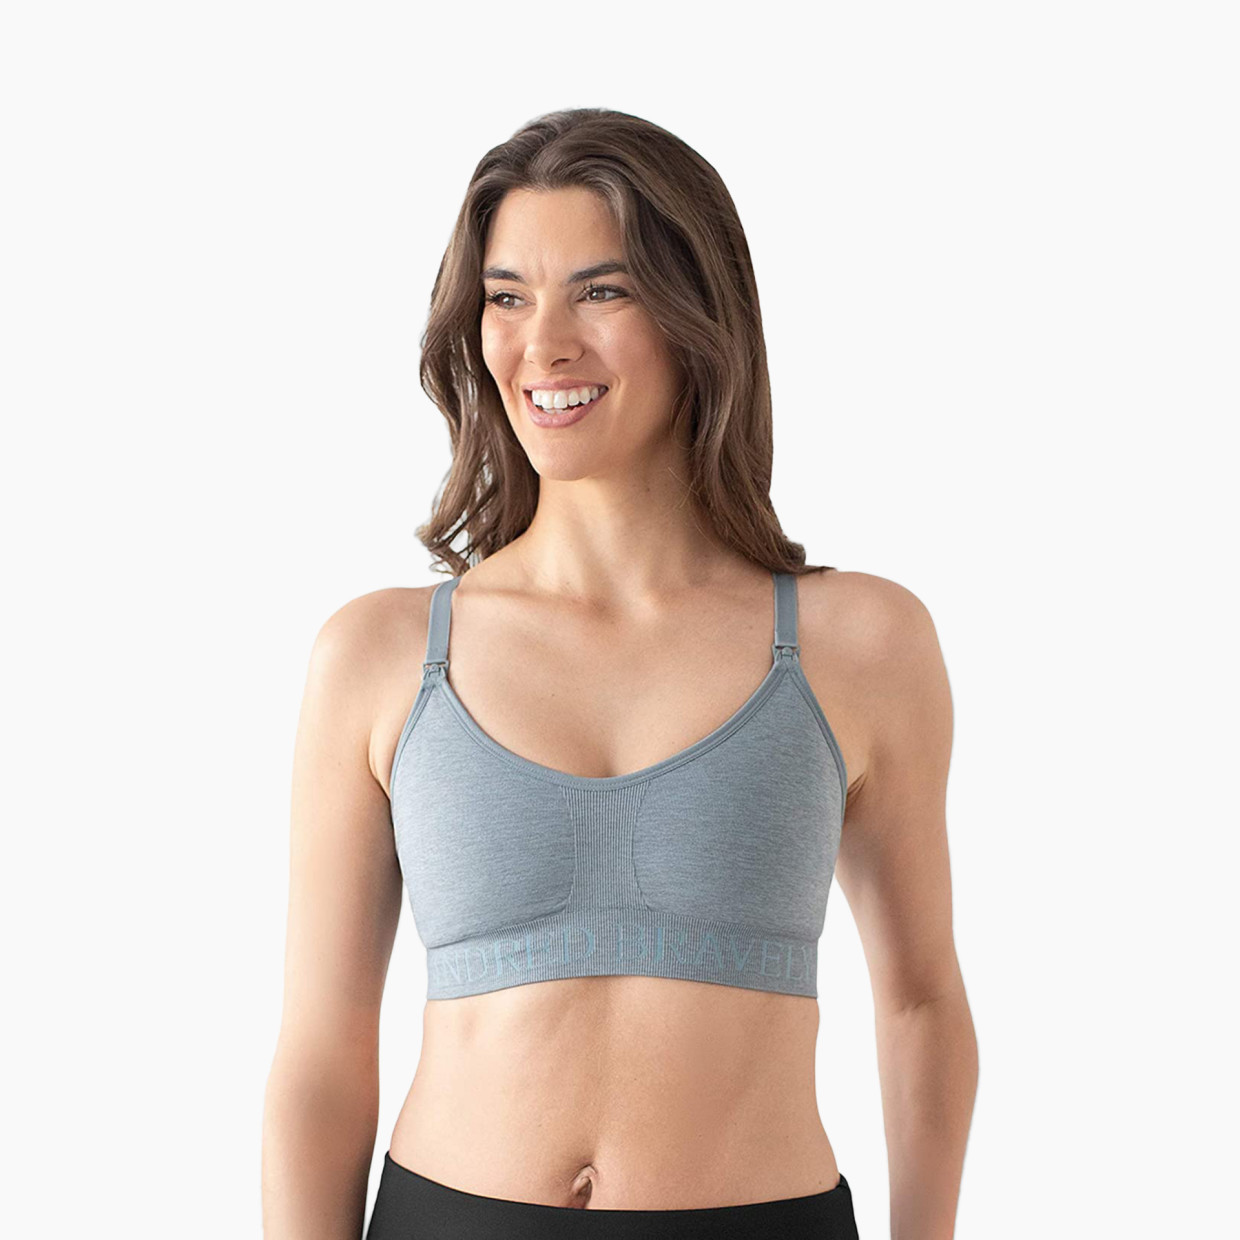 Kindred Bravely Sublime Support Low Impact Nursing & Maternity Sports Bra -  Seaglass Heather, Xx-Large